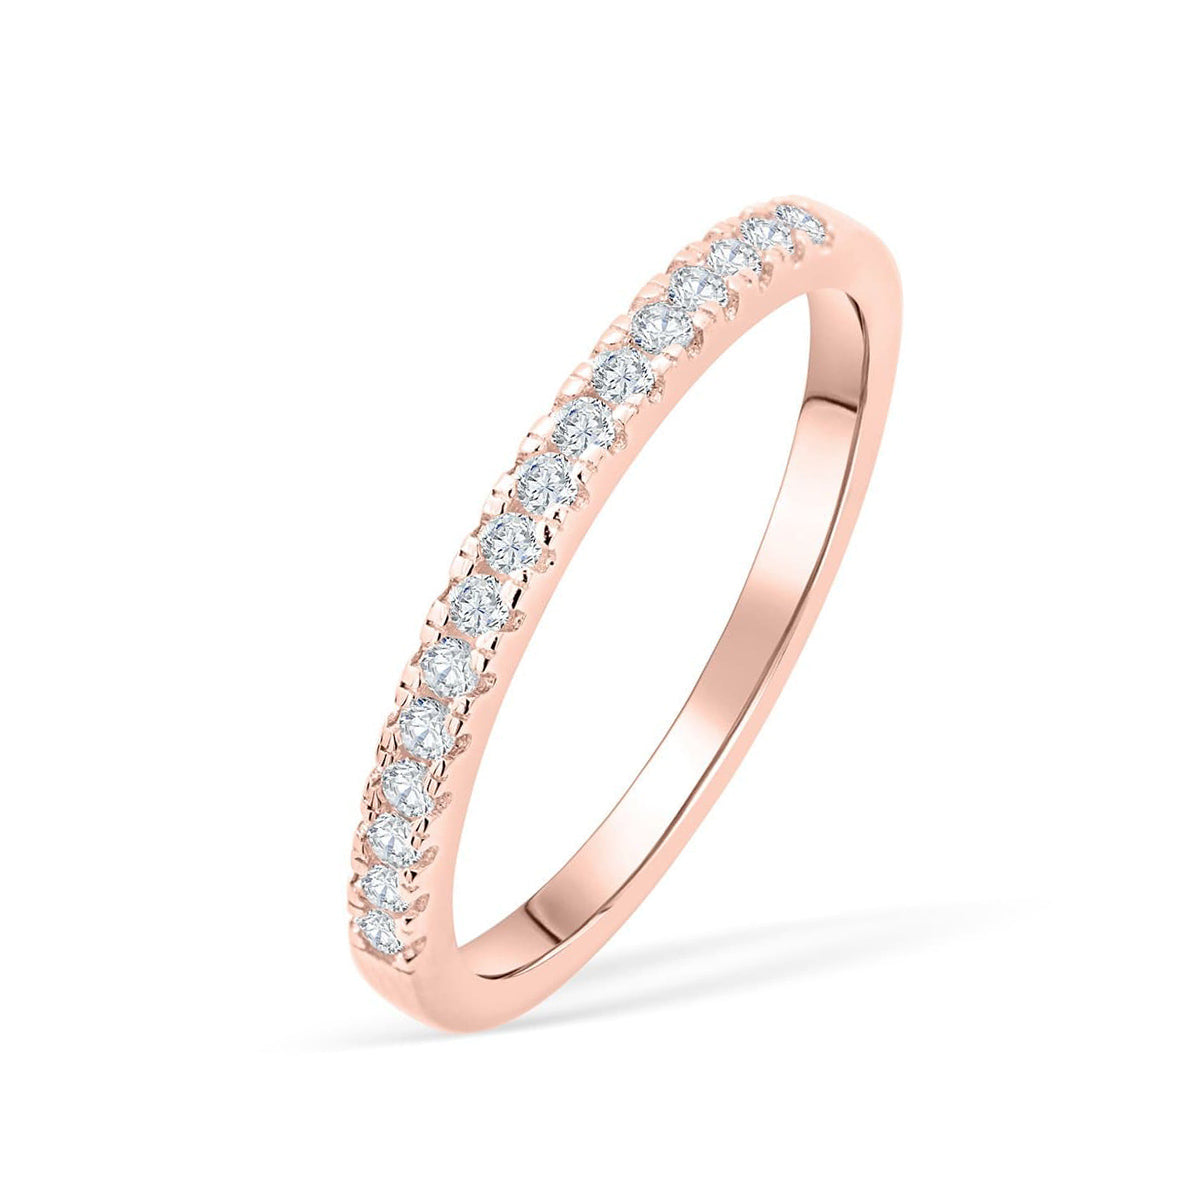 the desire rose gold wedding band